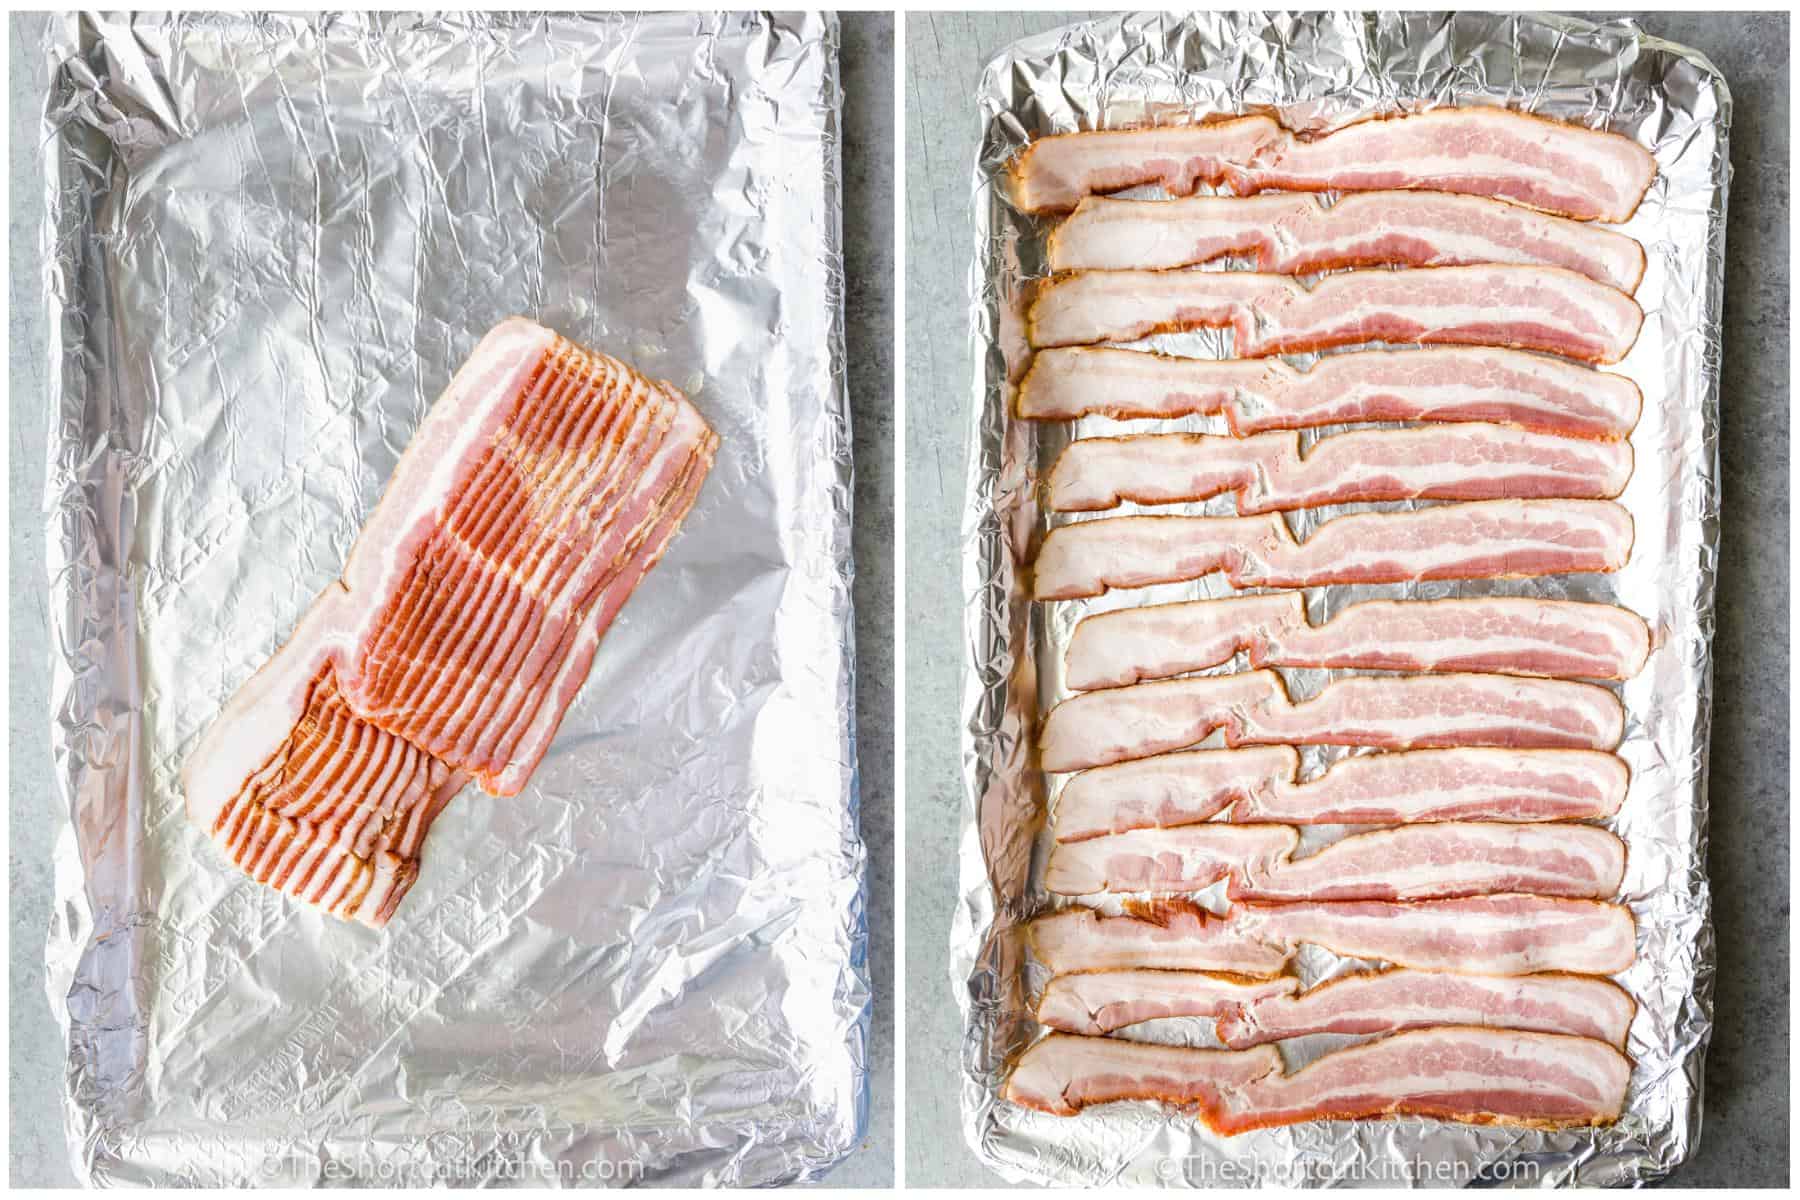 slices of uncooked bacon on a foil lined baking sheet, in a pile and spread out, to make Oven Baked Bacon